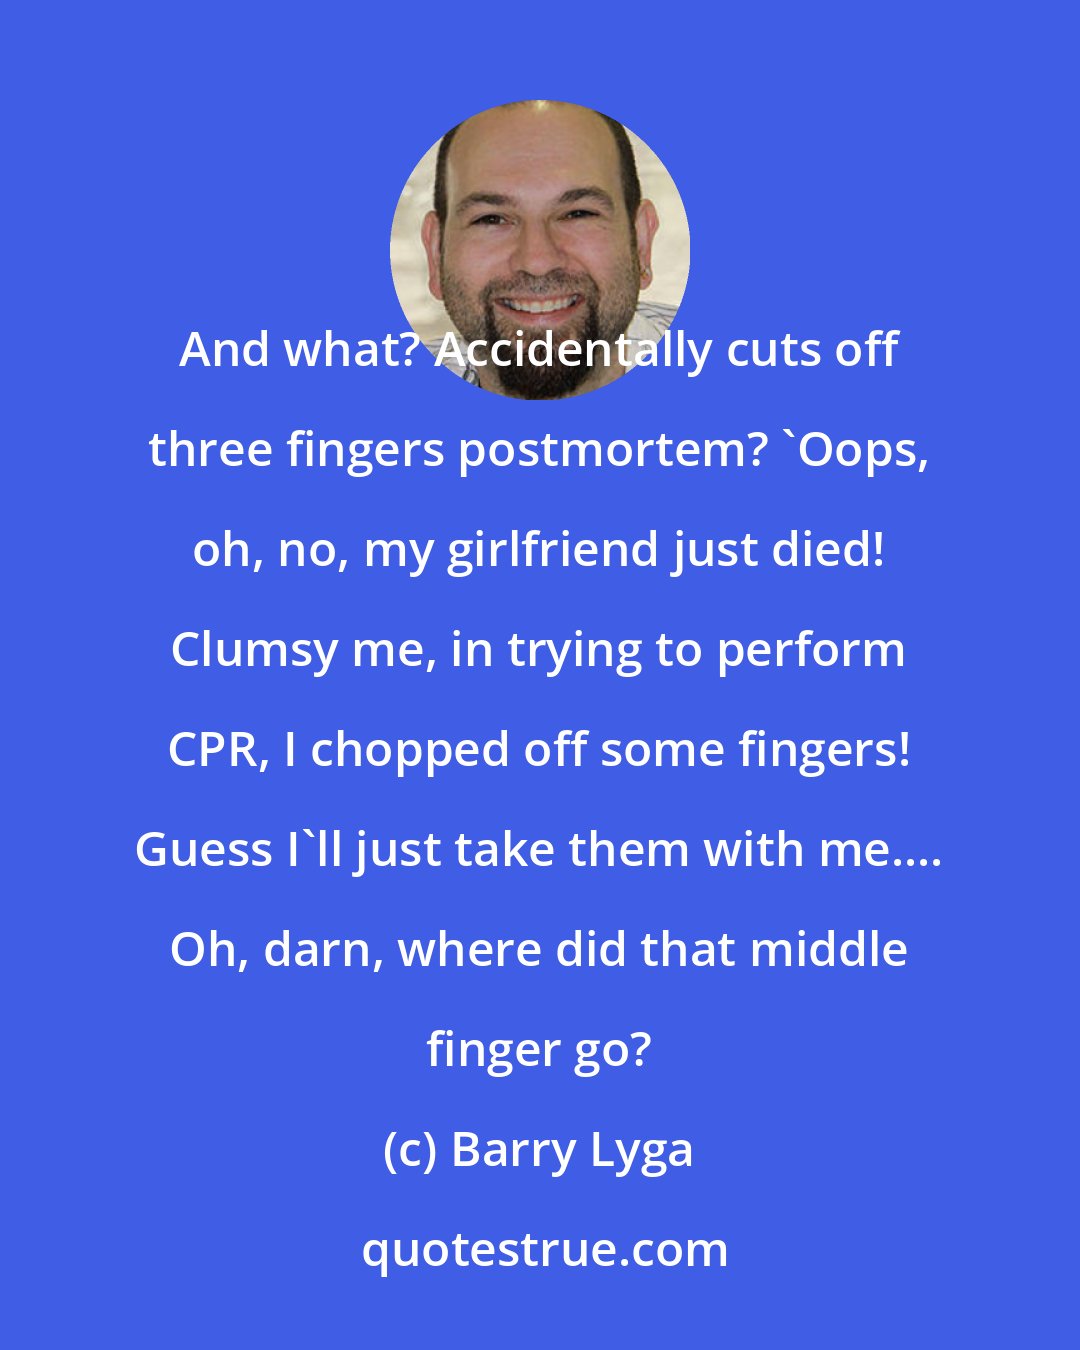 Barry Lyga: And what? Accidentally cuts off three fingers postmortem? 'Oops, oh, no, my girlfriend just died! Clumsy me, in trying to perform CPR, I chopped off some fingers! Guess I'll just take them with me.... Oh, darn, where did that middle finger go?